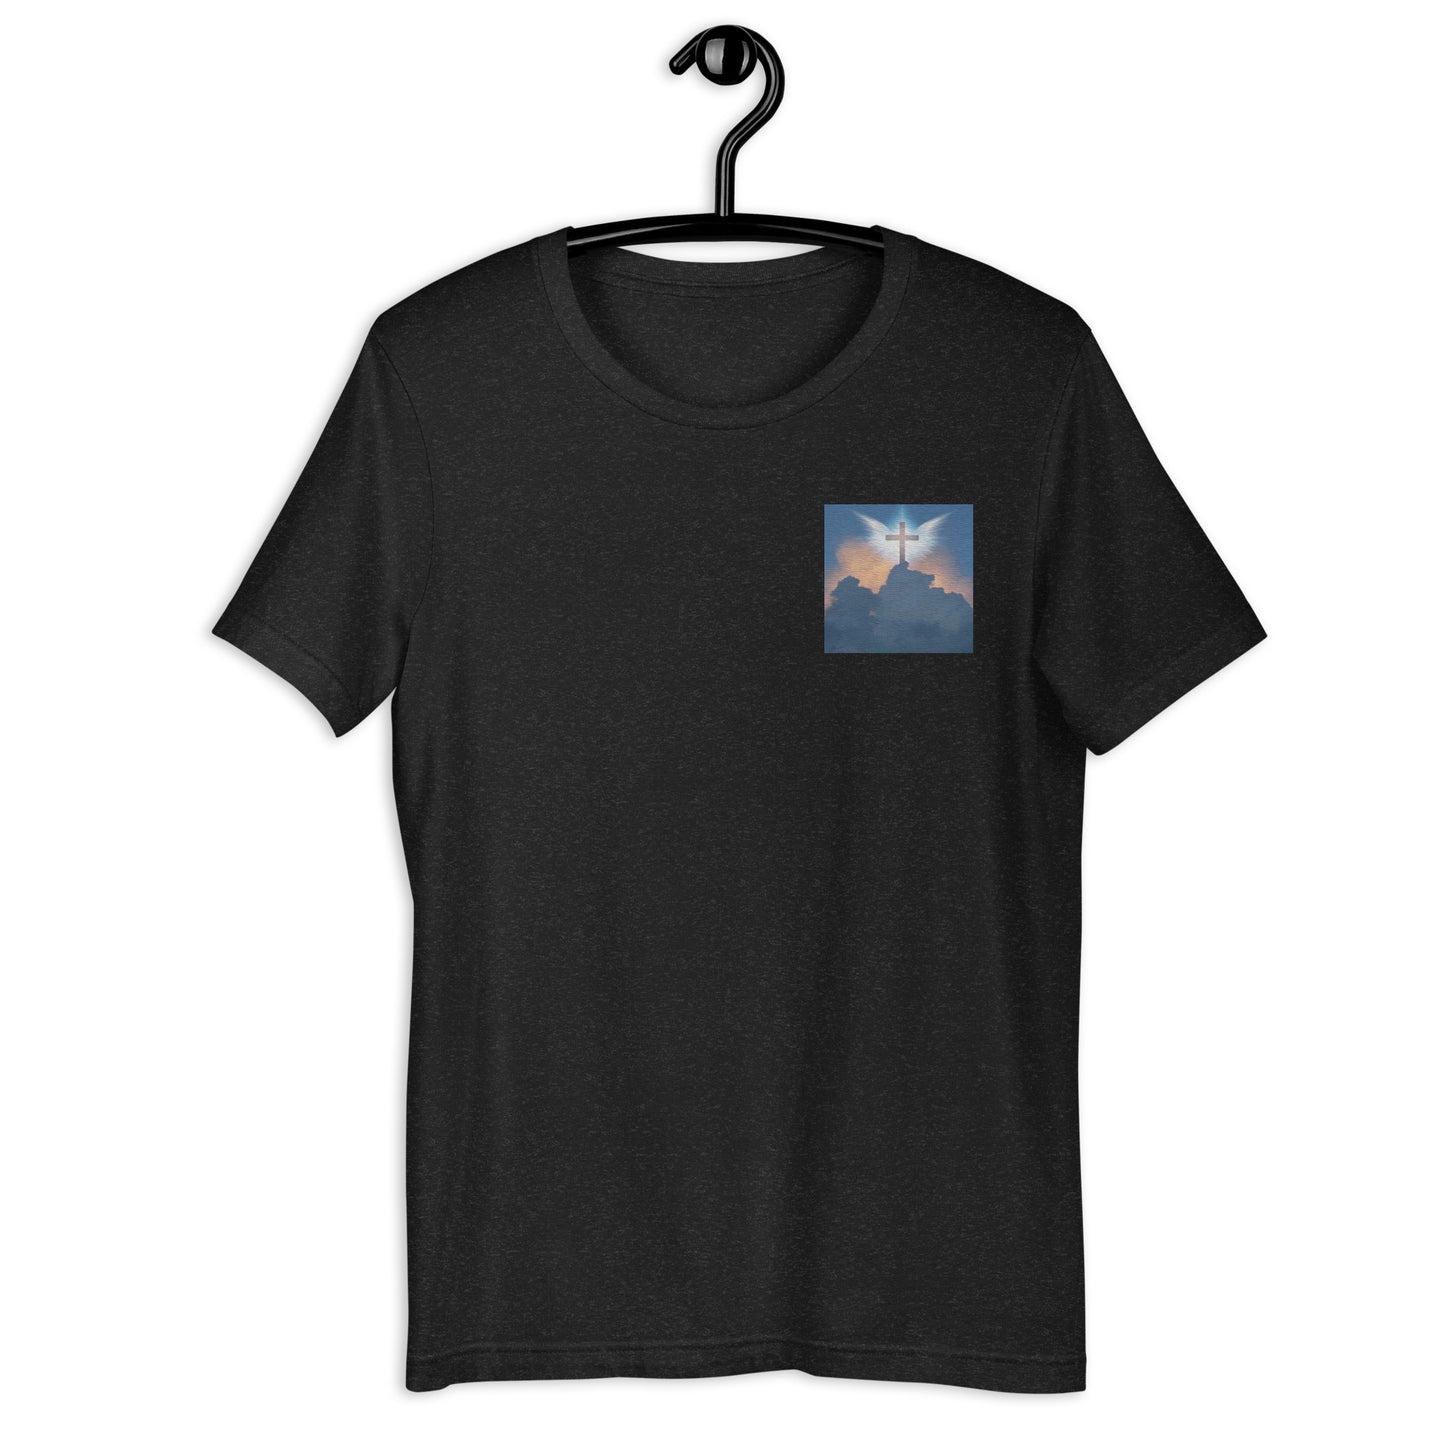 Embroidered Cross on Clouds T shirt